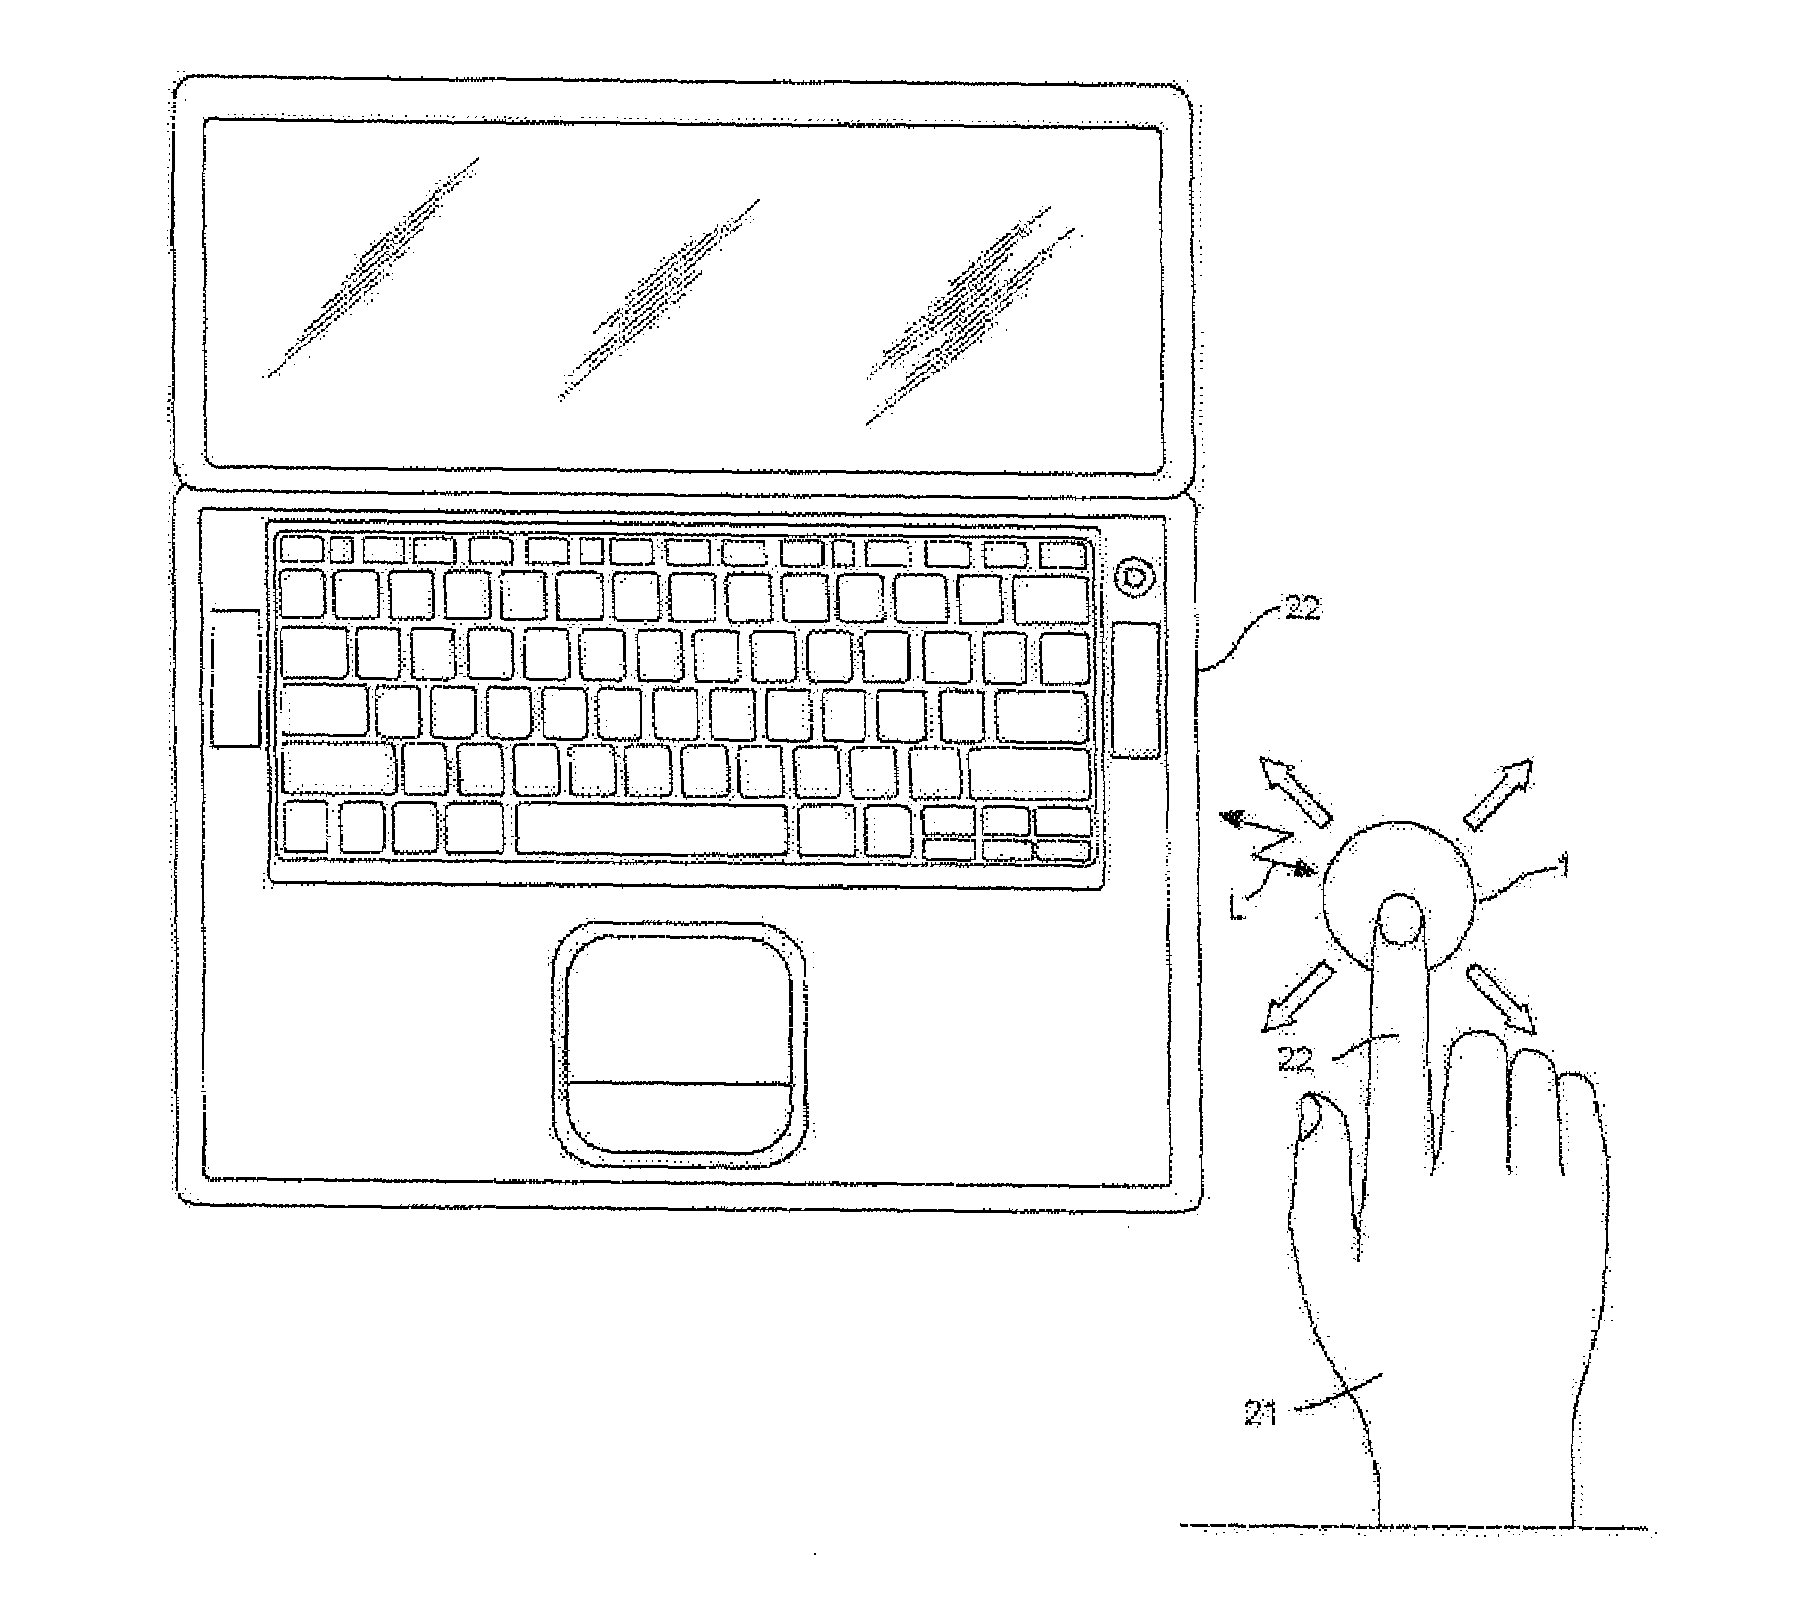 User operable pointing device such as mouse